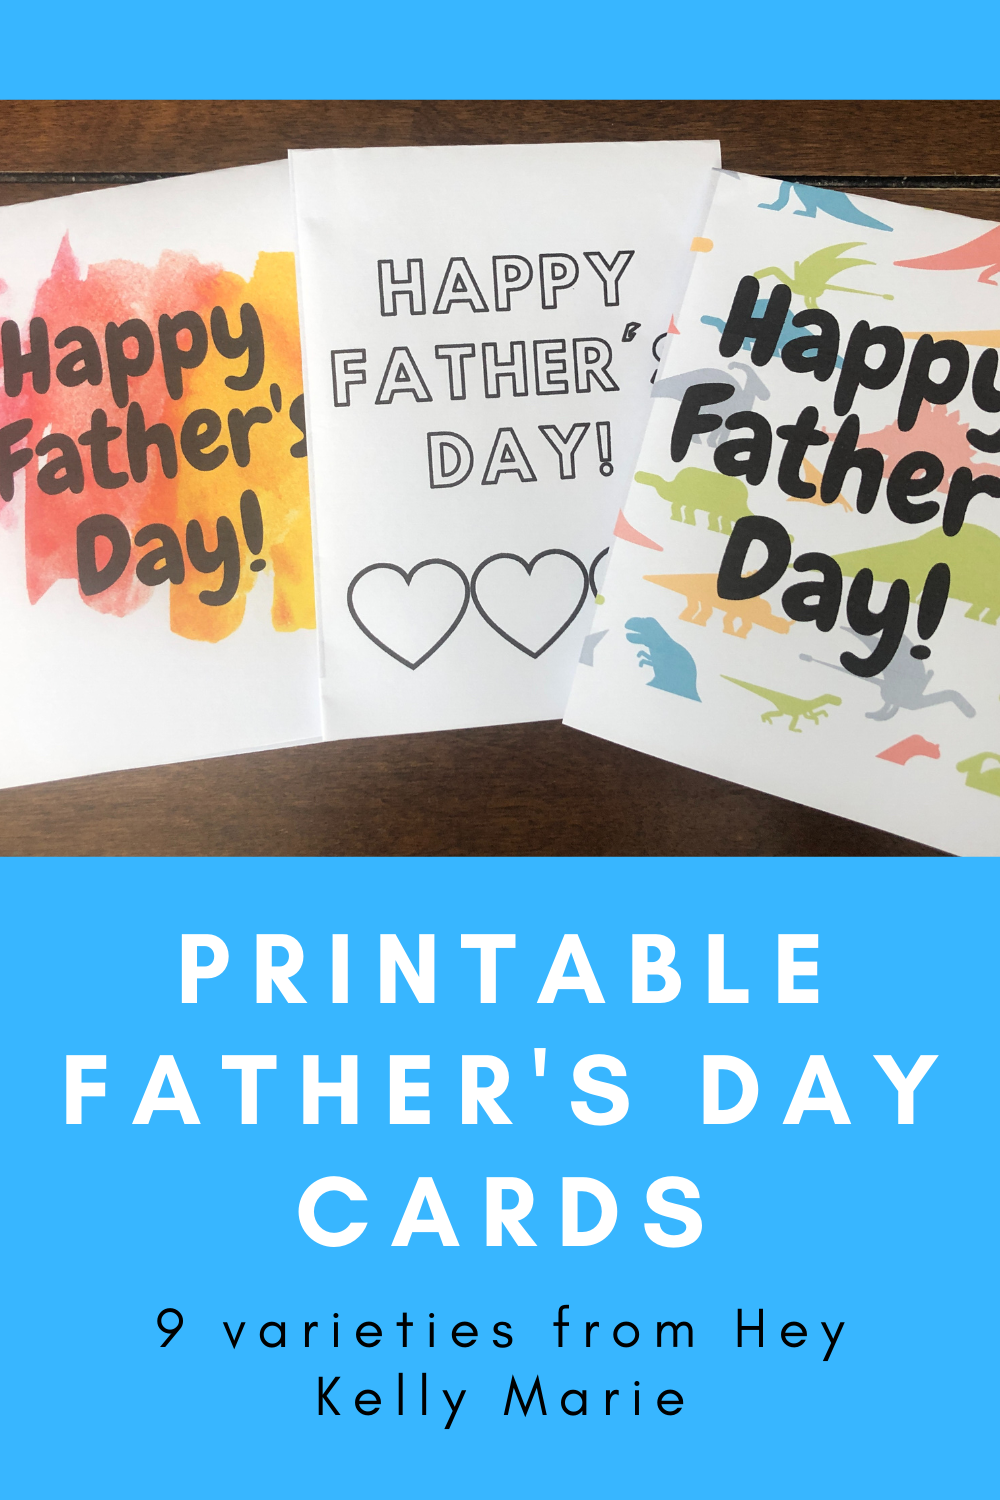 Printable Father's Day Cards for Dad and Grandpa